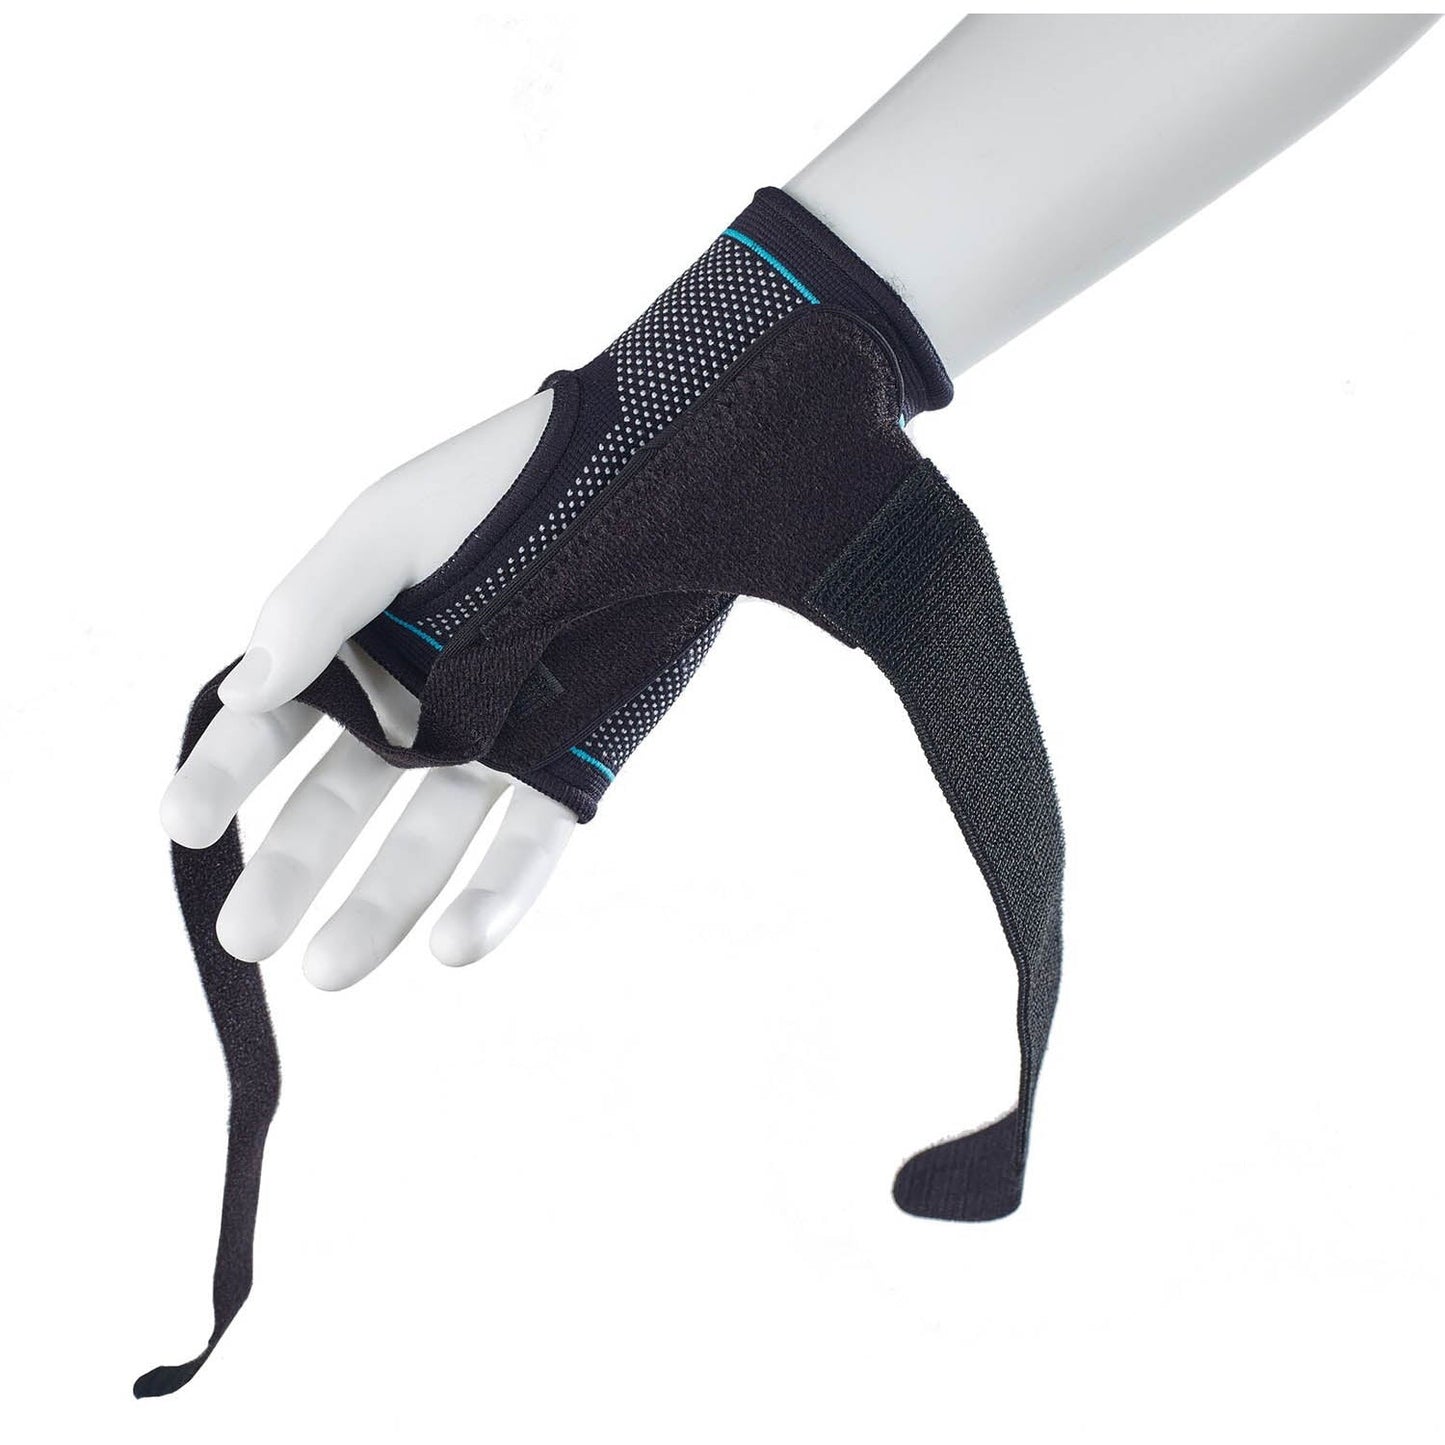 Advanced Ultimate Compression Wrist Support with Splint